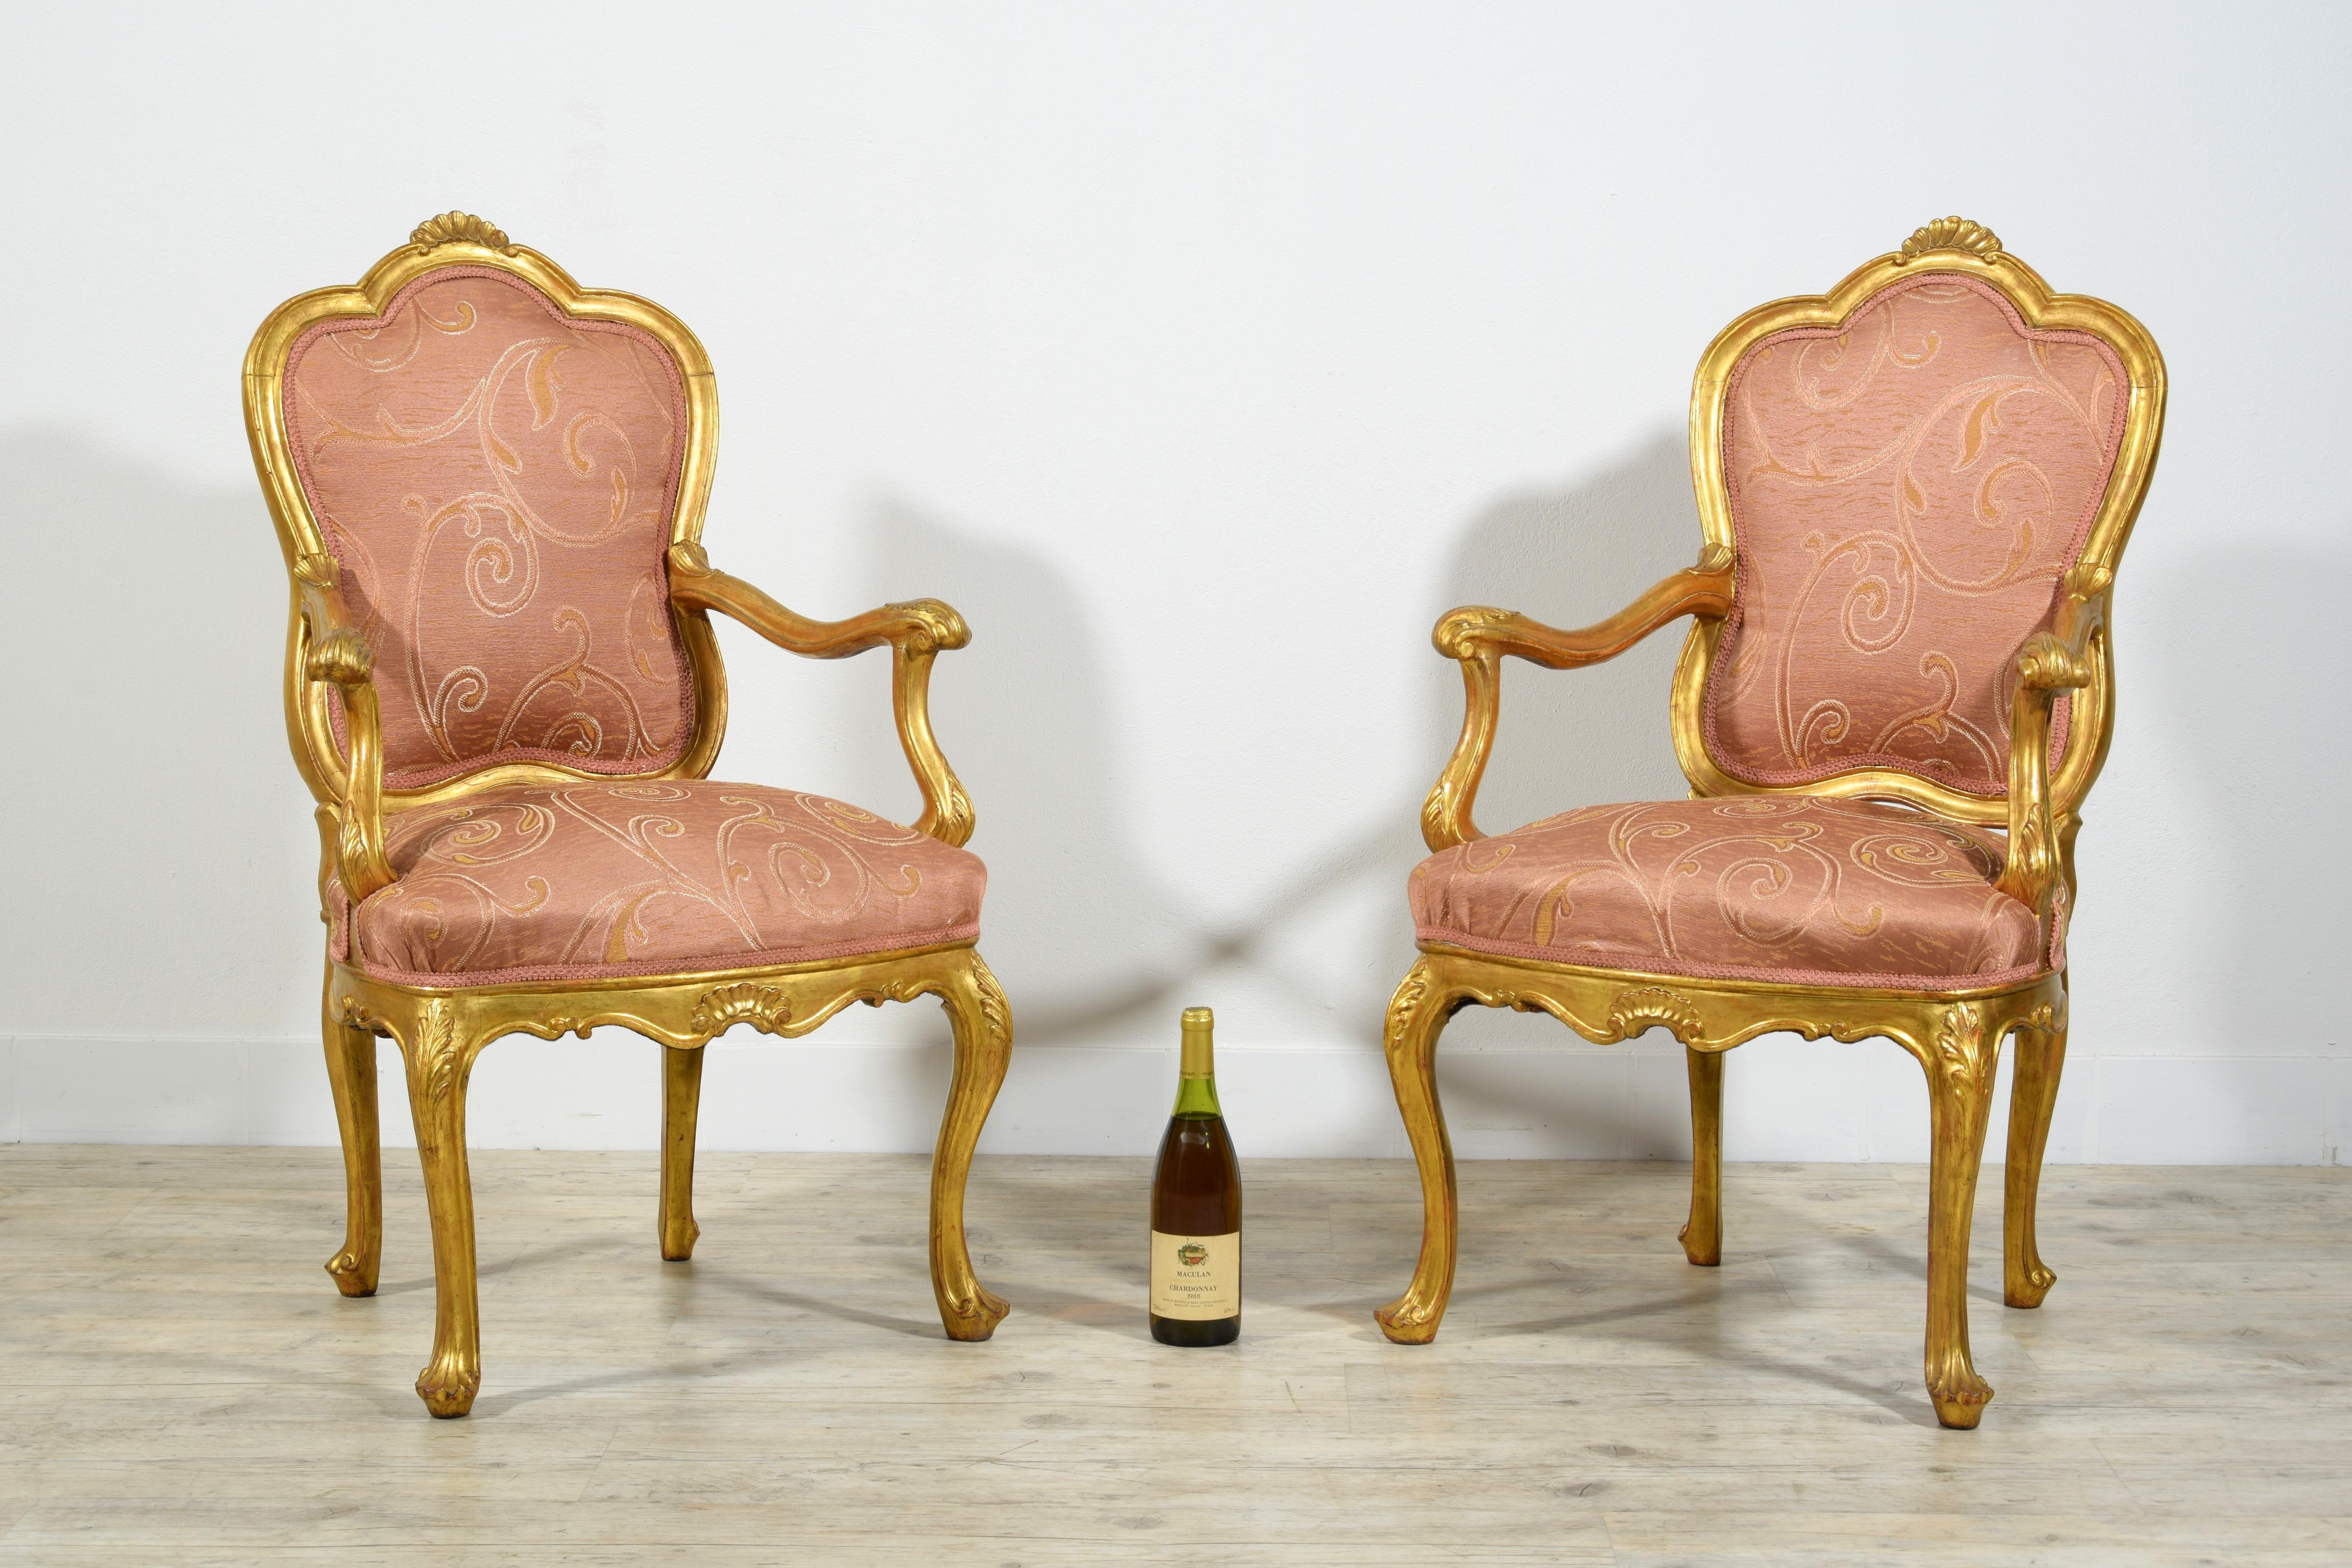 19th century, pair of Italian giltwood armchairs 
The refined pair of armchairs was made at the beginning of the 19th century in Venice (Italy), in gilded wood, finely carved with rocaille motifs characteristic of the Louis XV era. The carvings